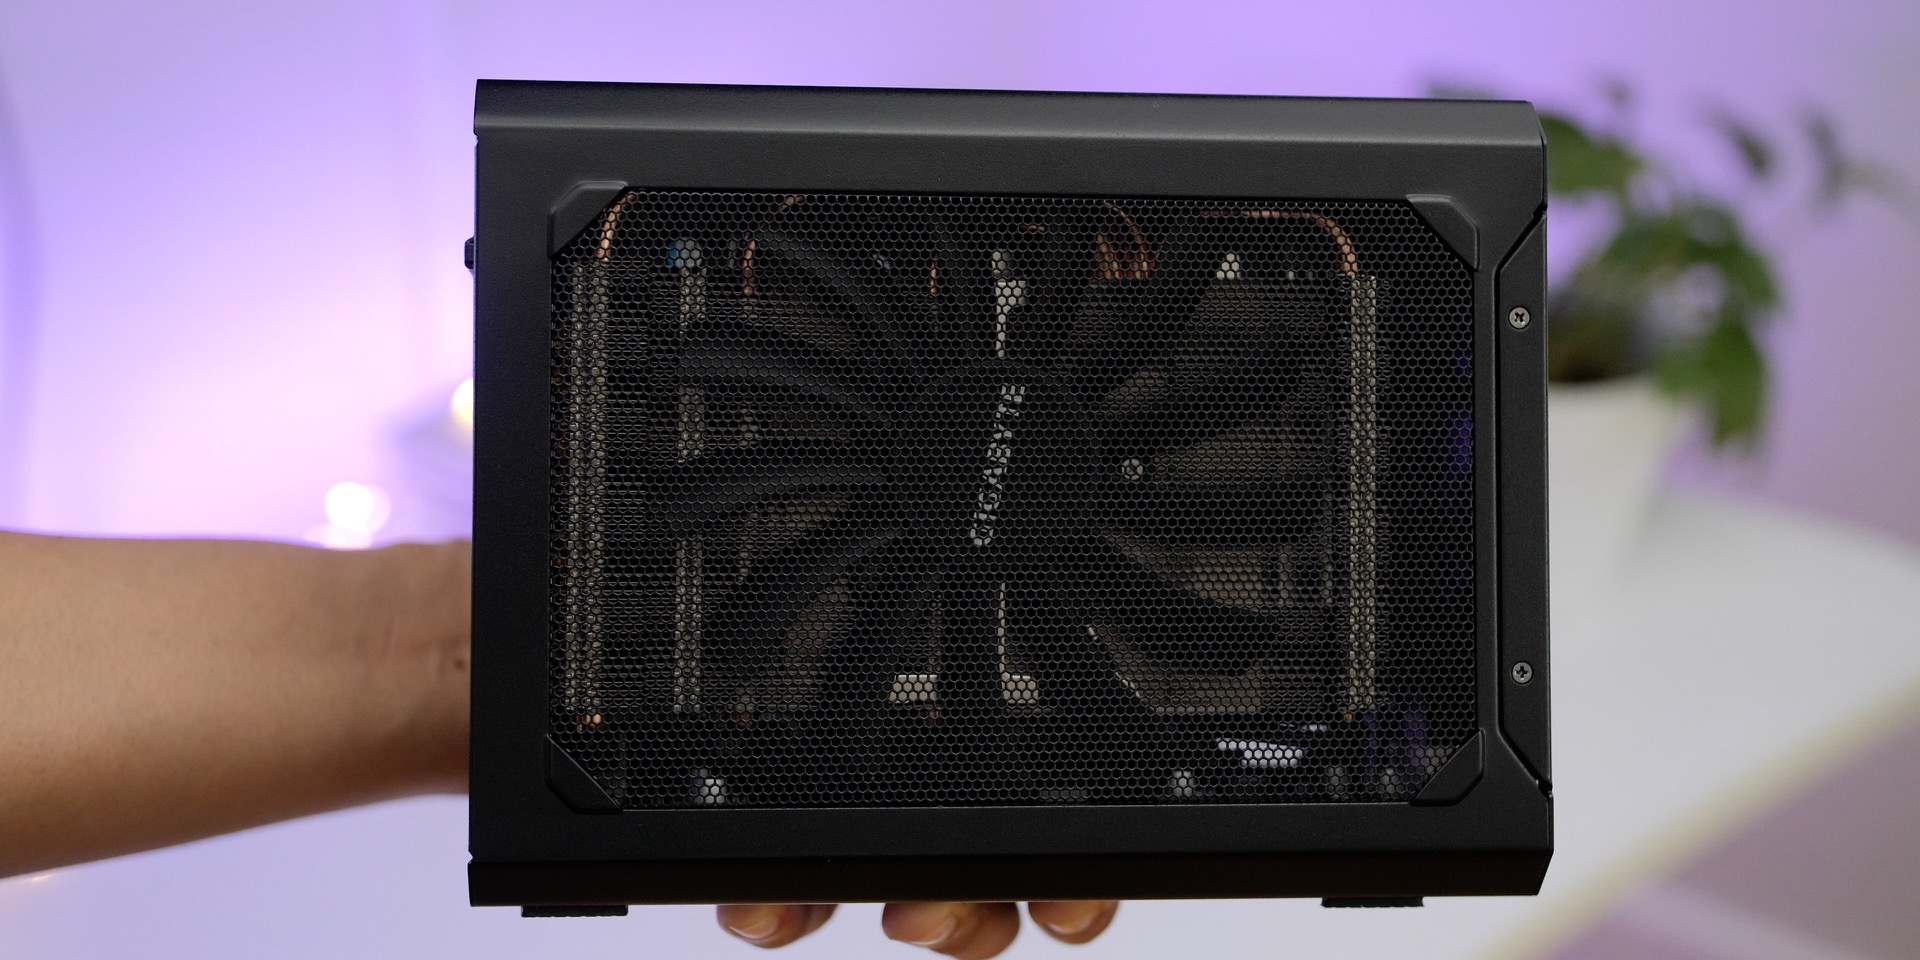 Hands-on: Gigabyte’s portable RX 580 ‘Gaming Box’ eGPU packs a punch